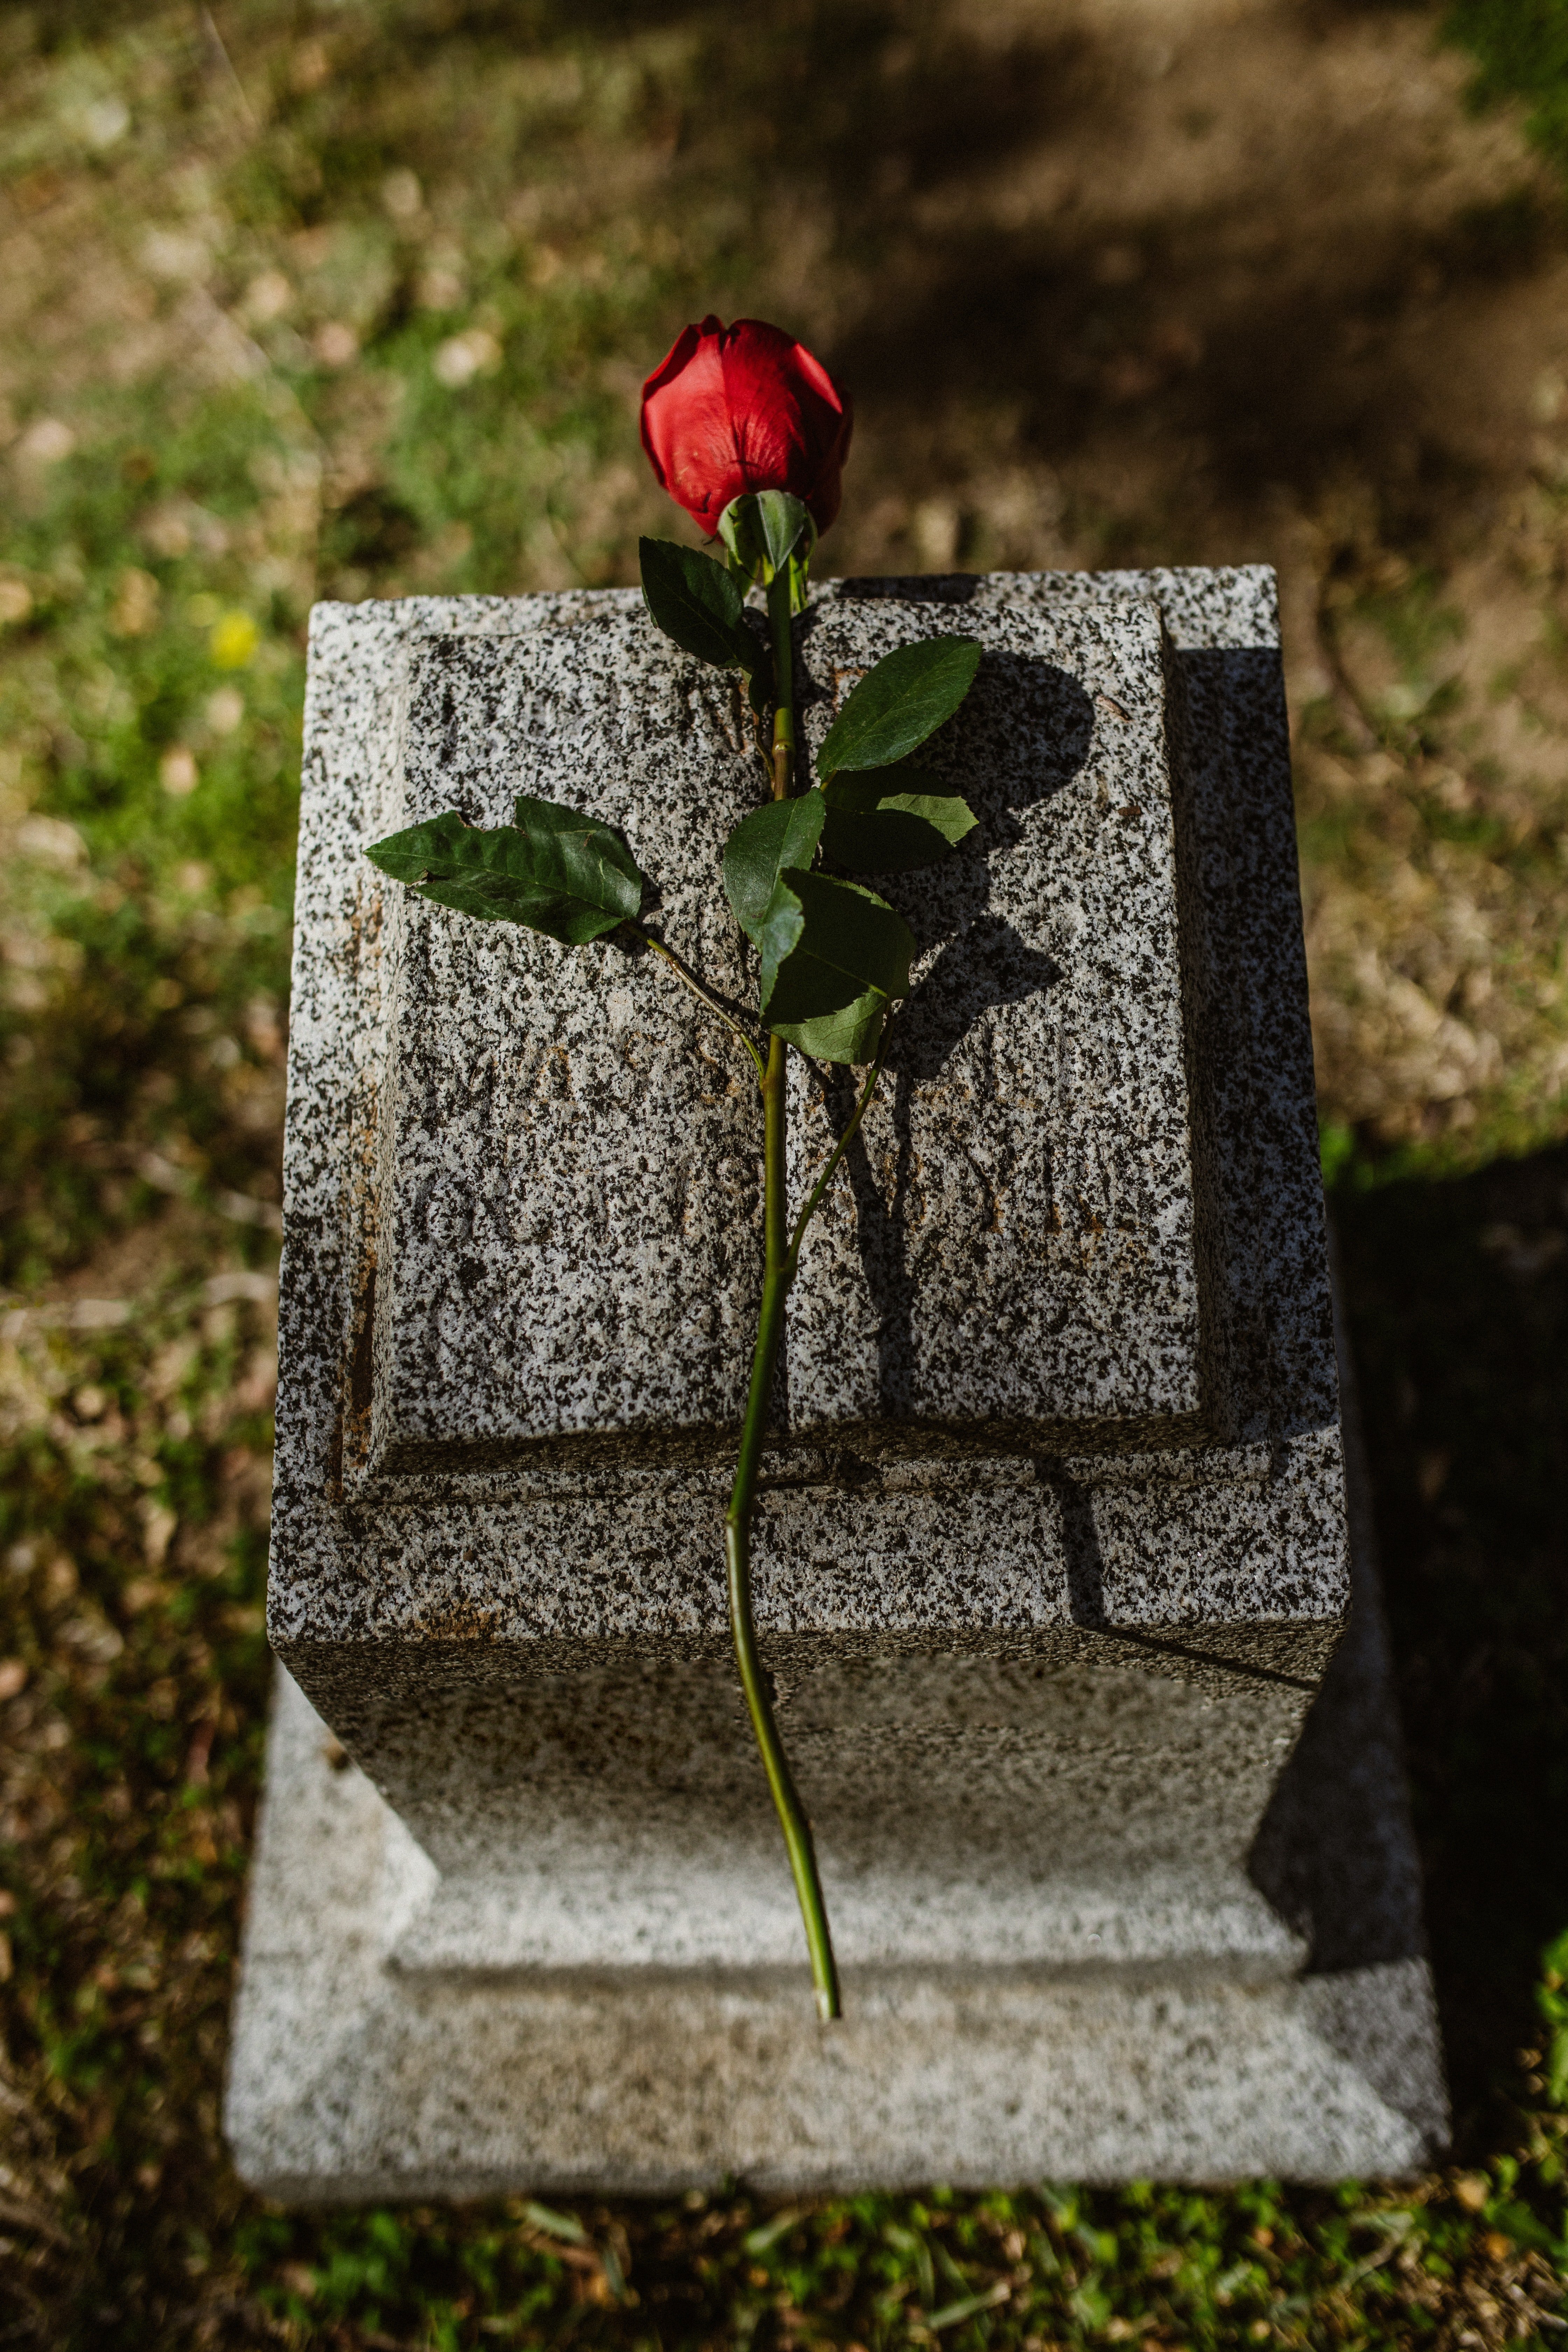 A red rose placed on a gravestone. | Photo: Pexels